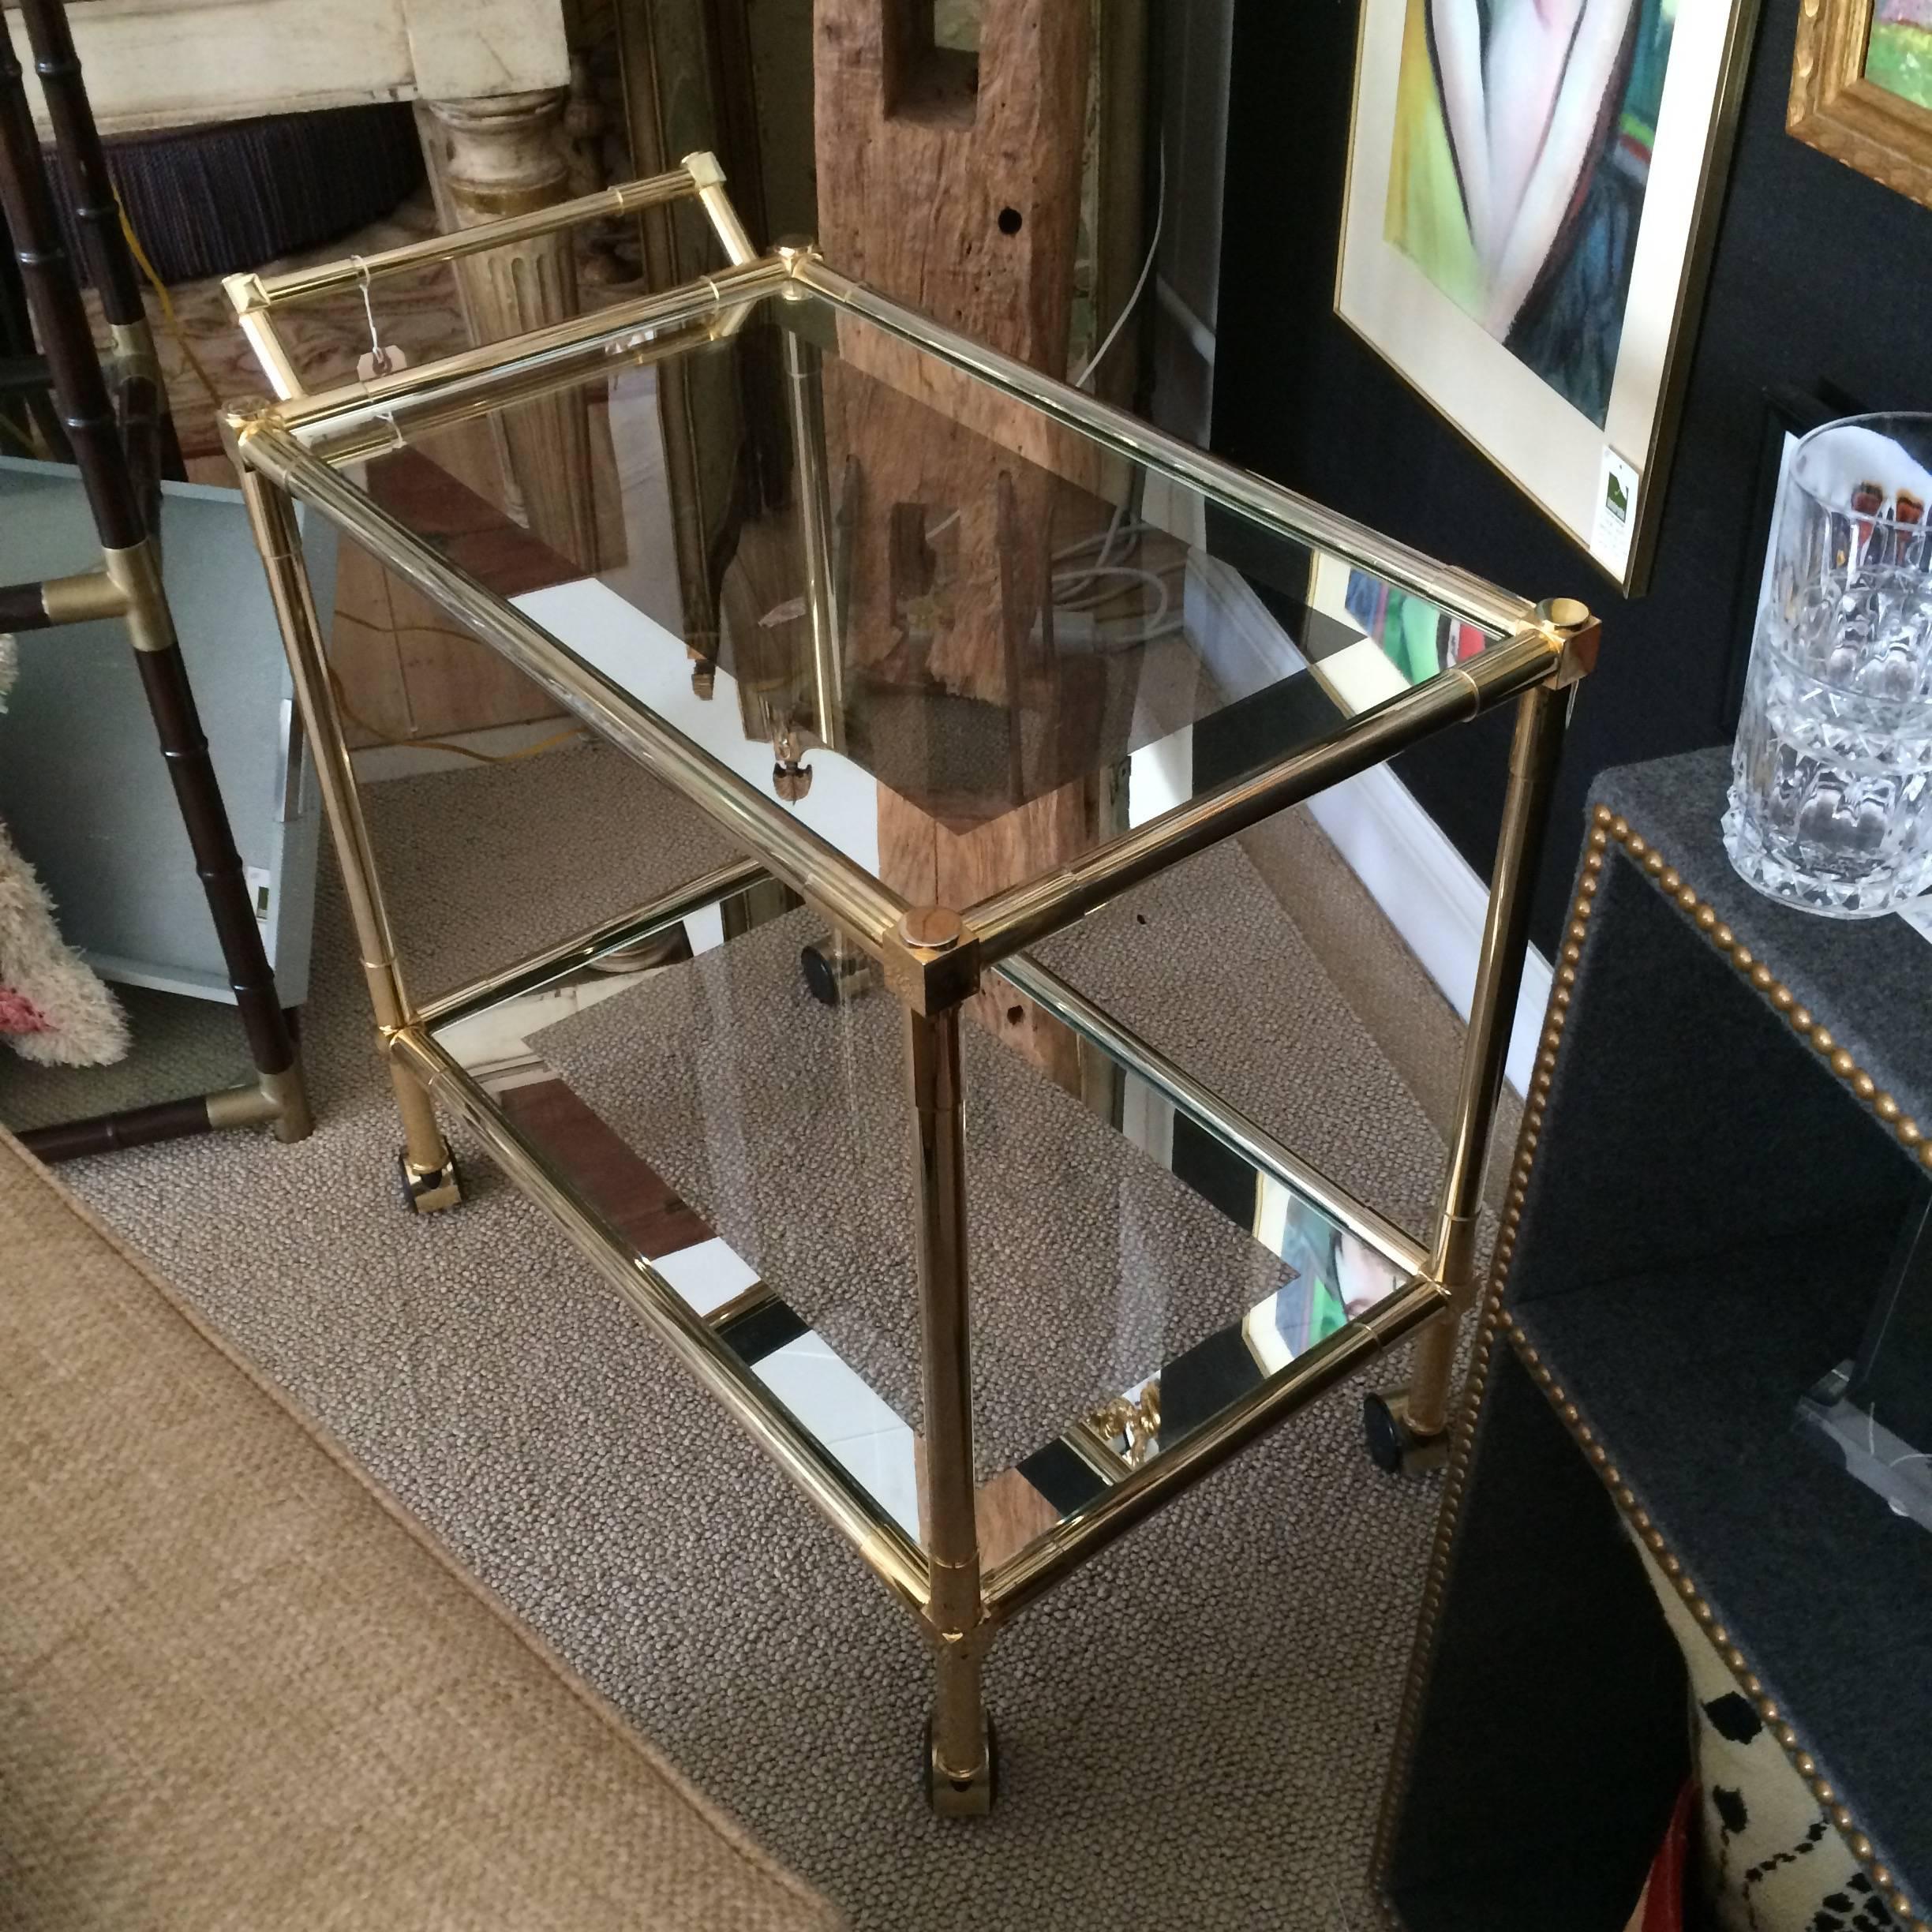 Elegant Mid-Century Modern bar cart with brass structure having geometric cube details on the handle and corners and two glass tiers that are mirrored around the edges for a glamorous look.